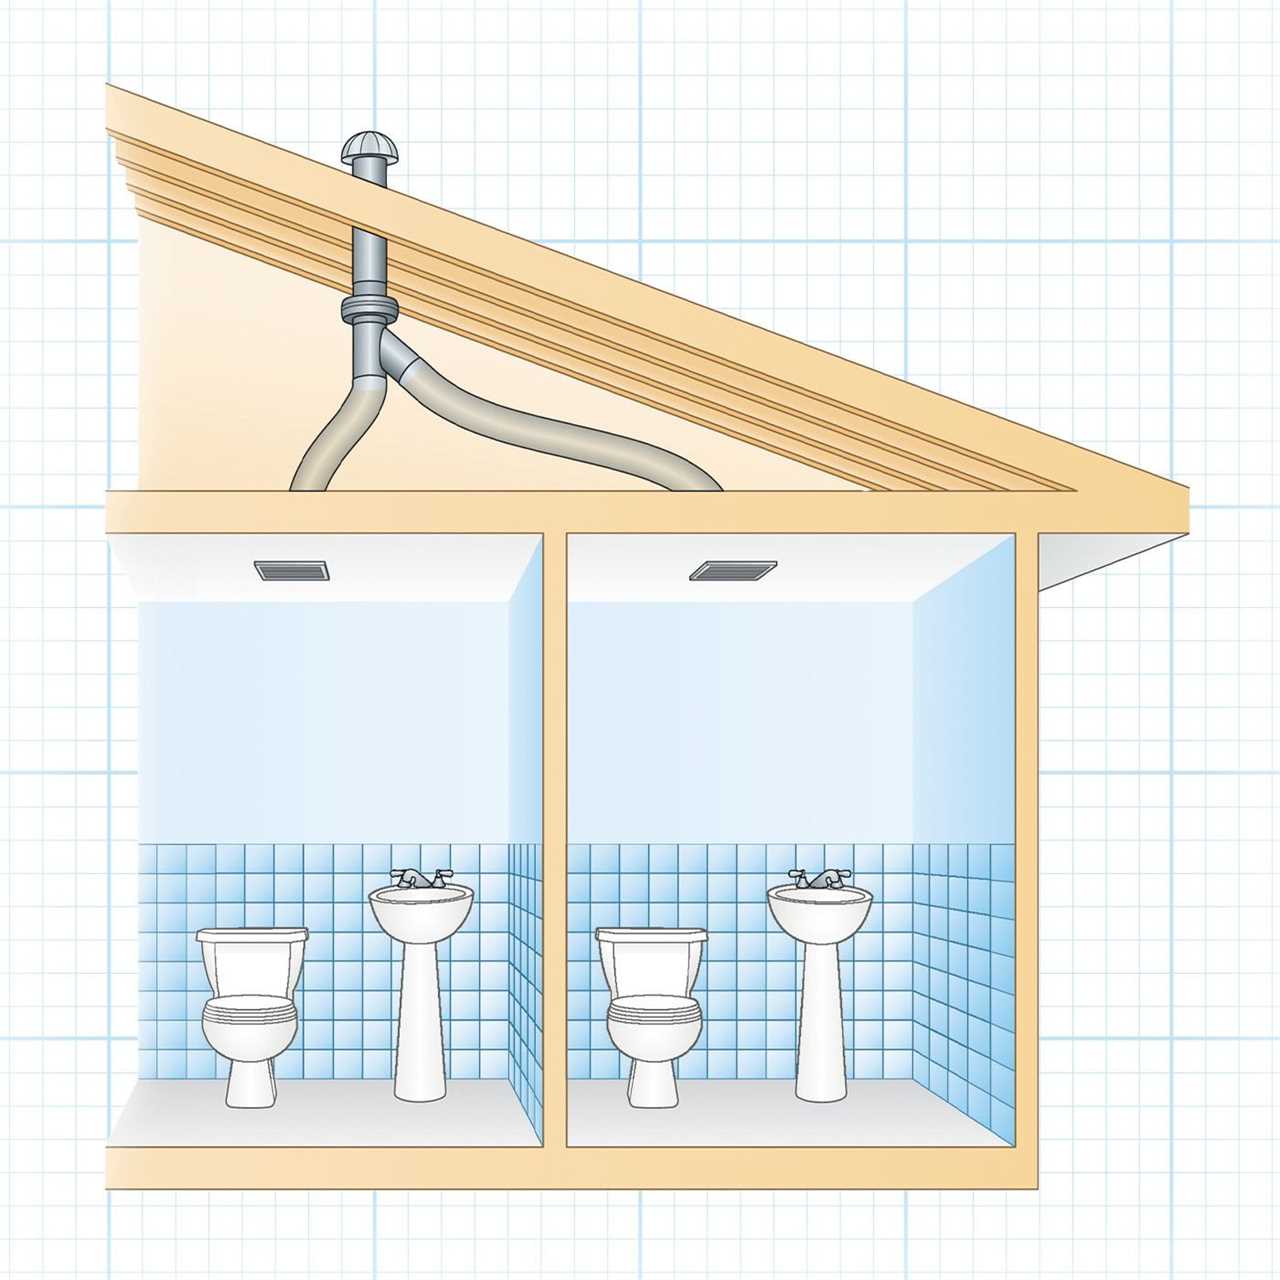 Inline Exhaust Fans: How to Use Them to Vent Multiple Bathrooms